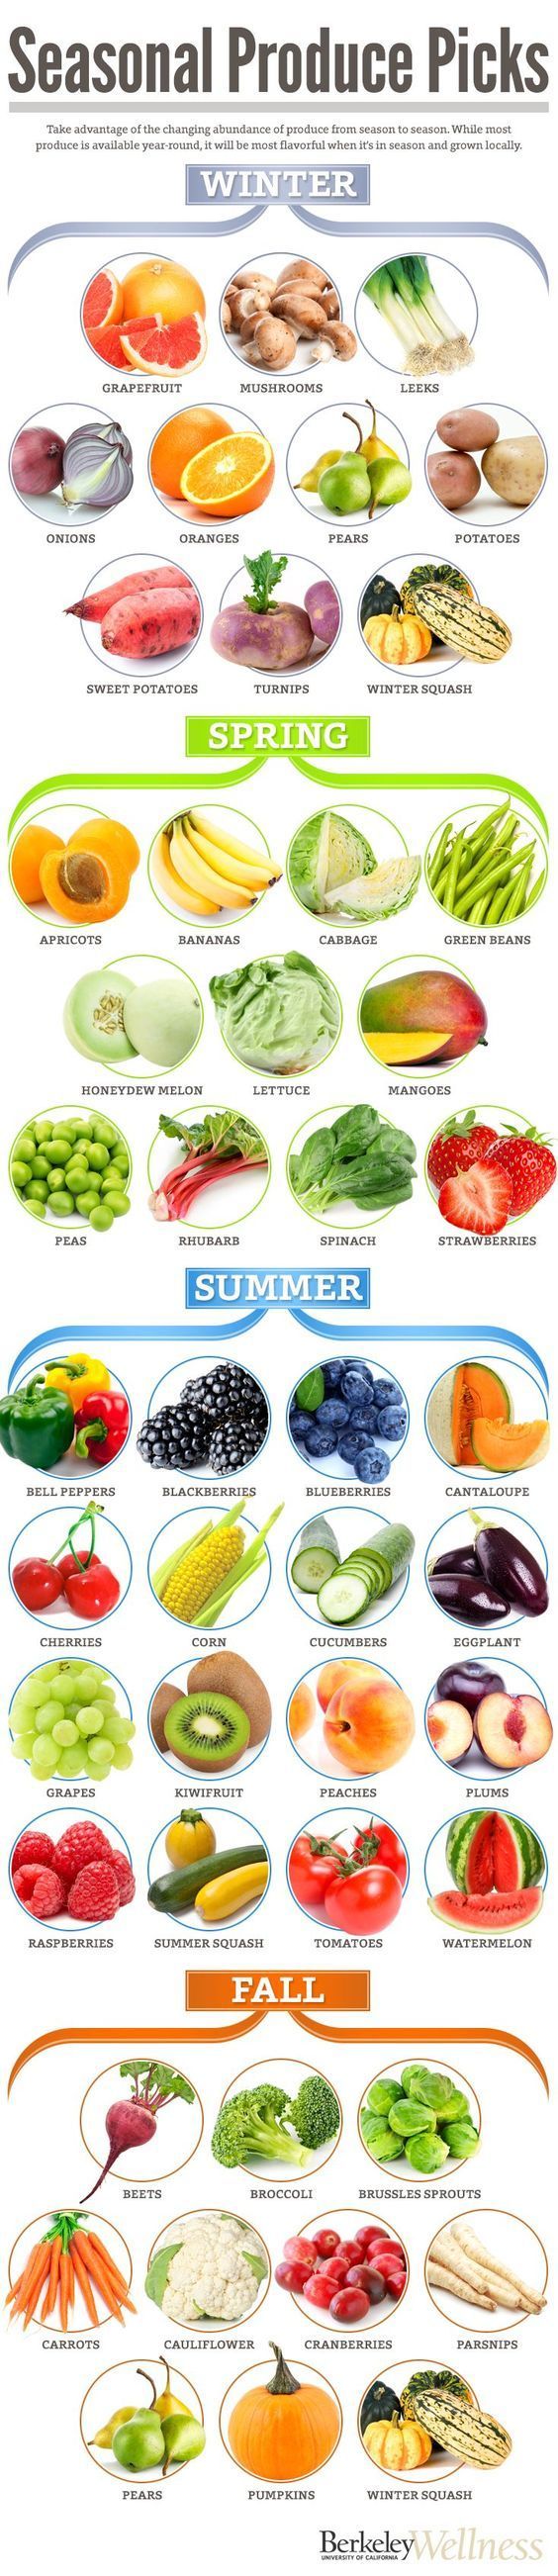 Whats in season? Here is a helpful guide to help you select produce thats at its peak.